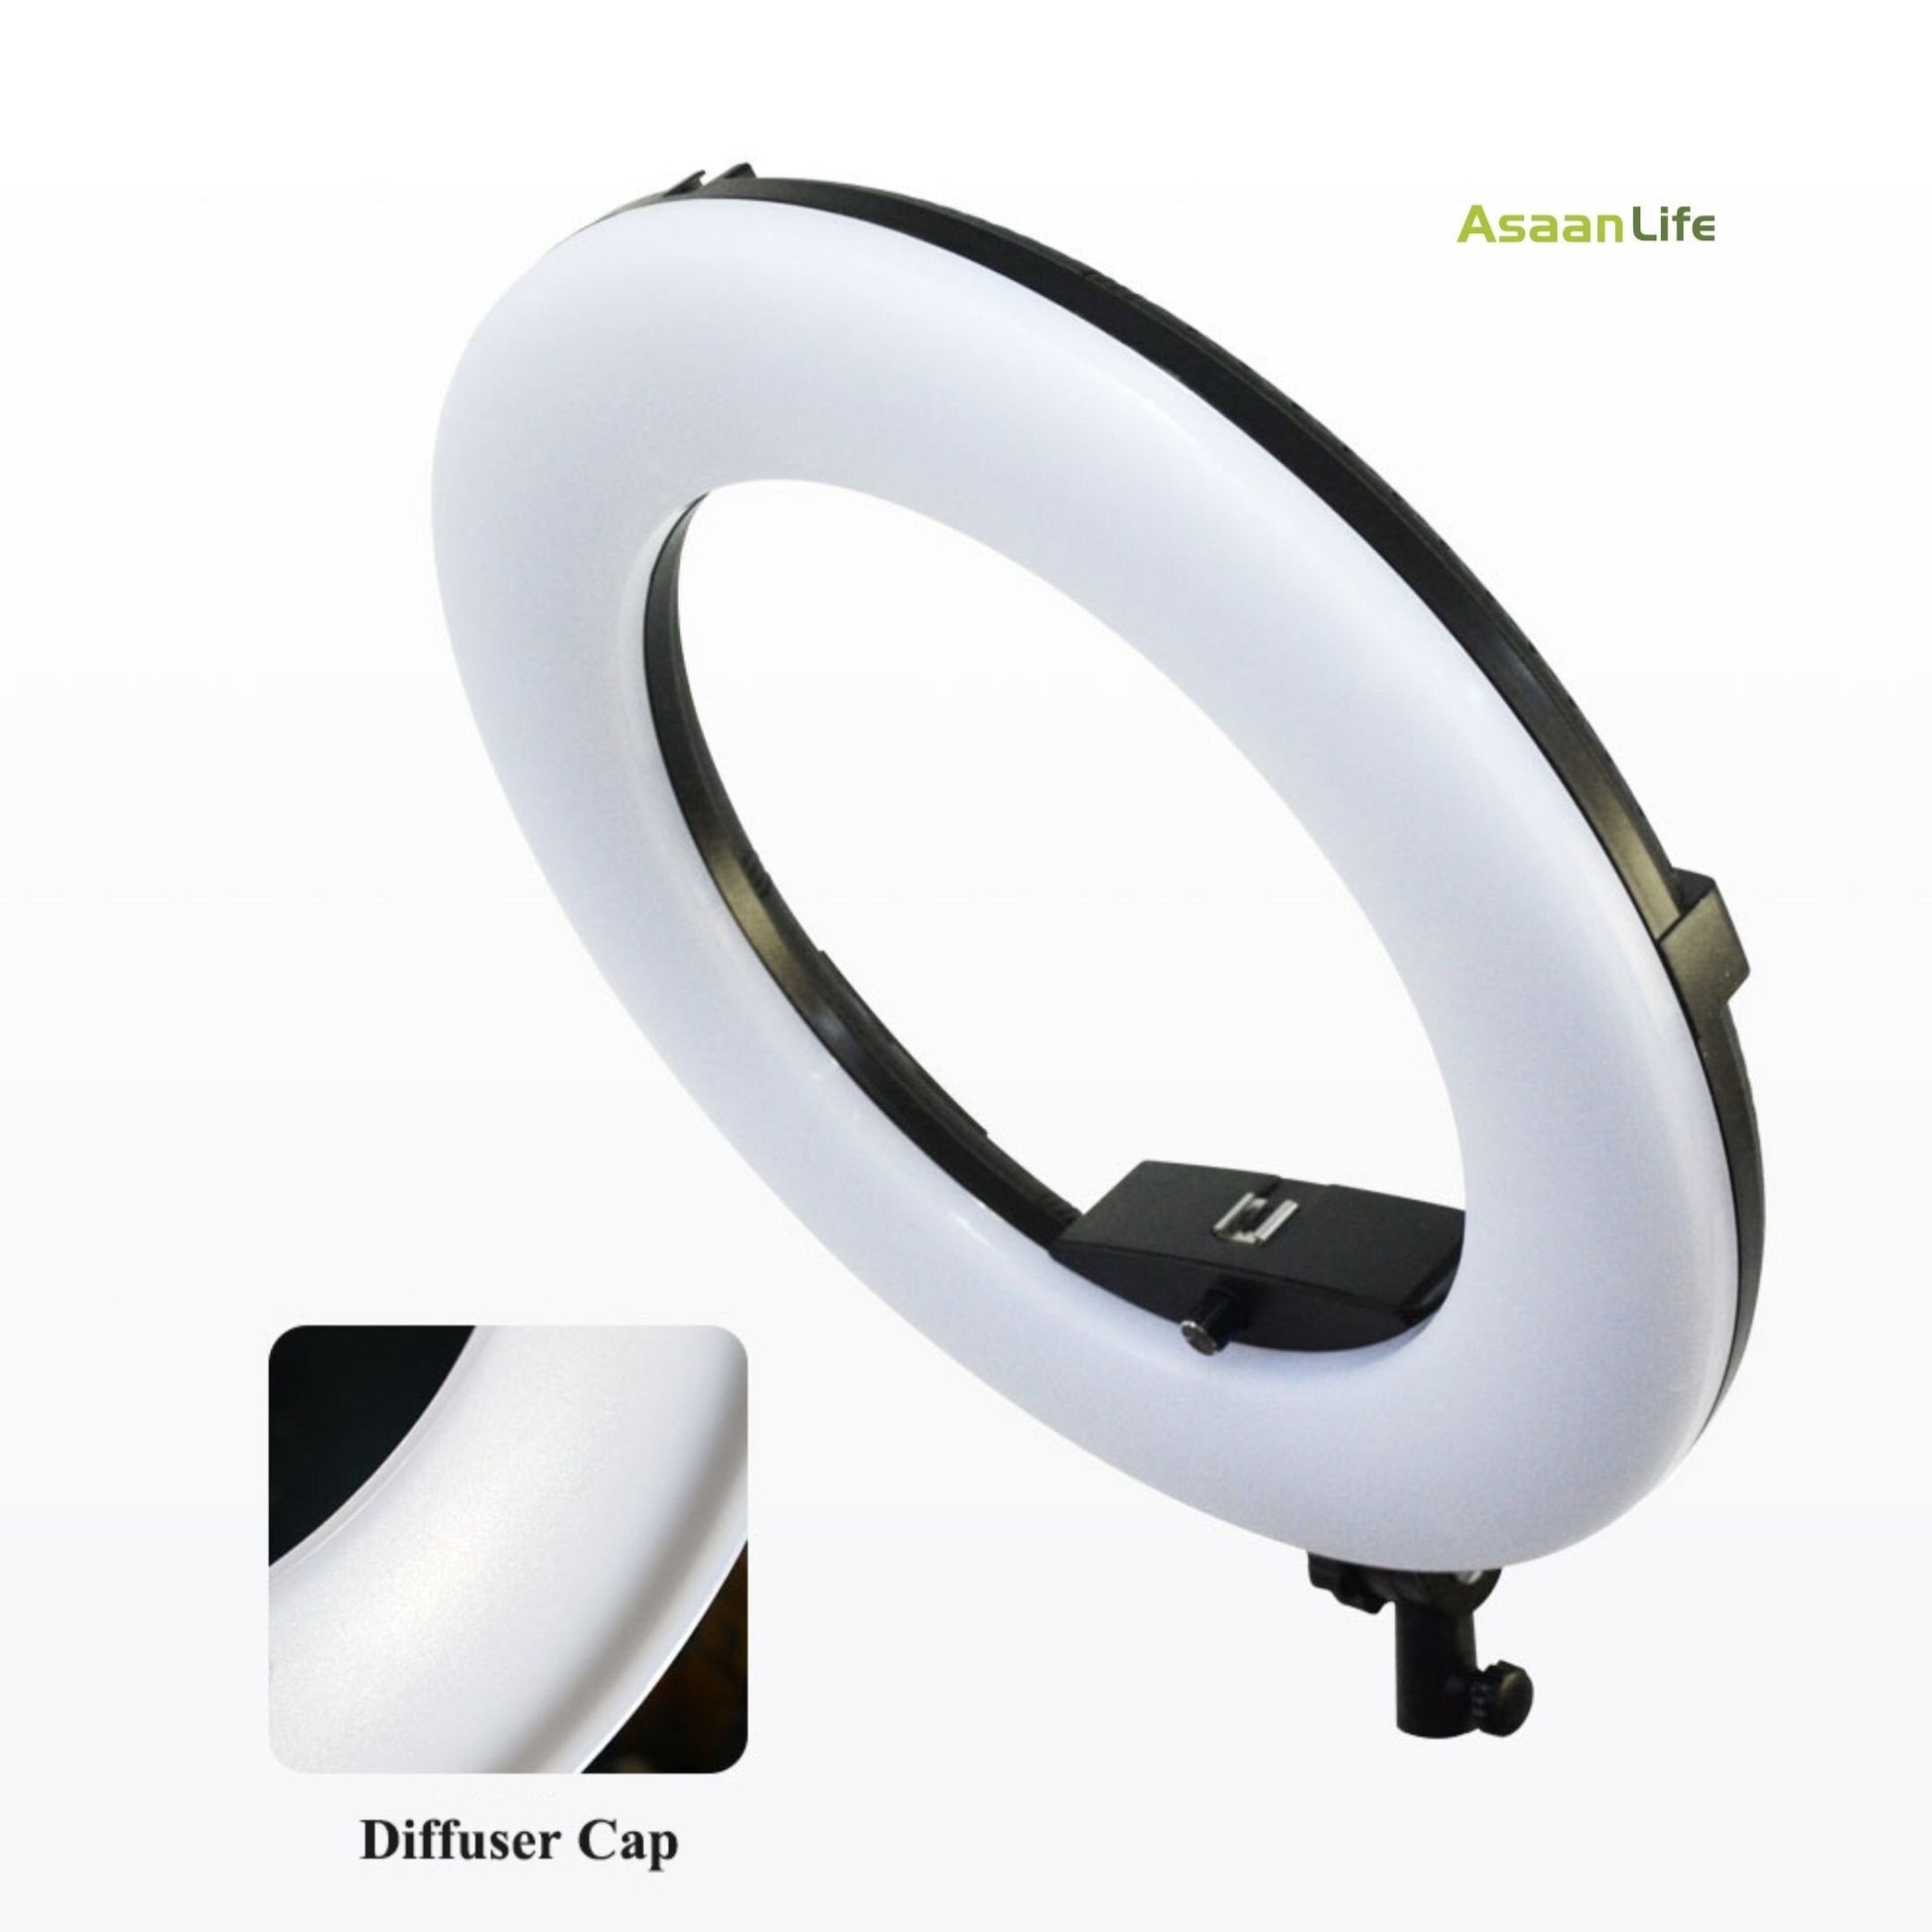 Portable 36cm Dimmable Selfie Ring Light with Remote Control for Studio Photography, Video Calls, Vlogging, Live Streaming, Makeup and All Occasions